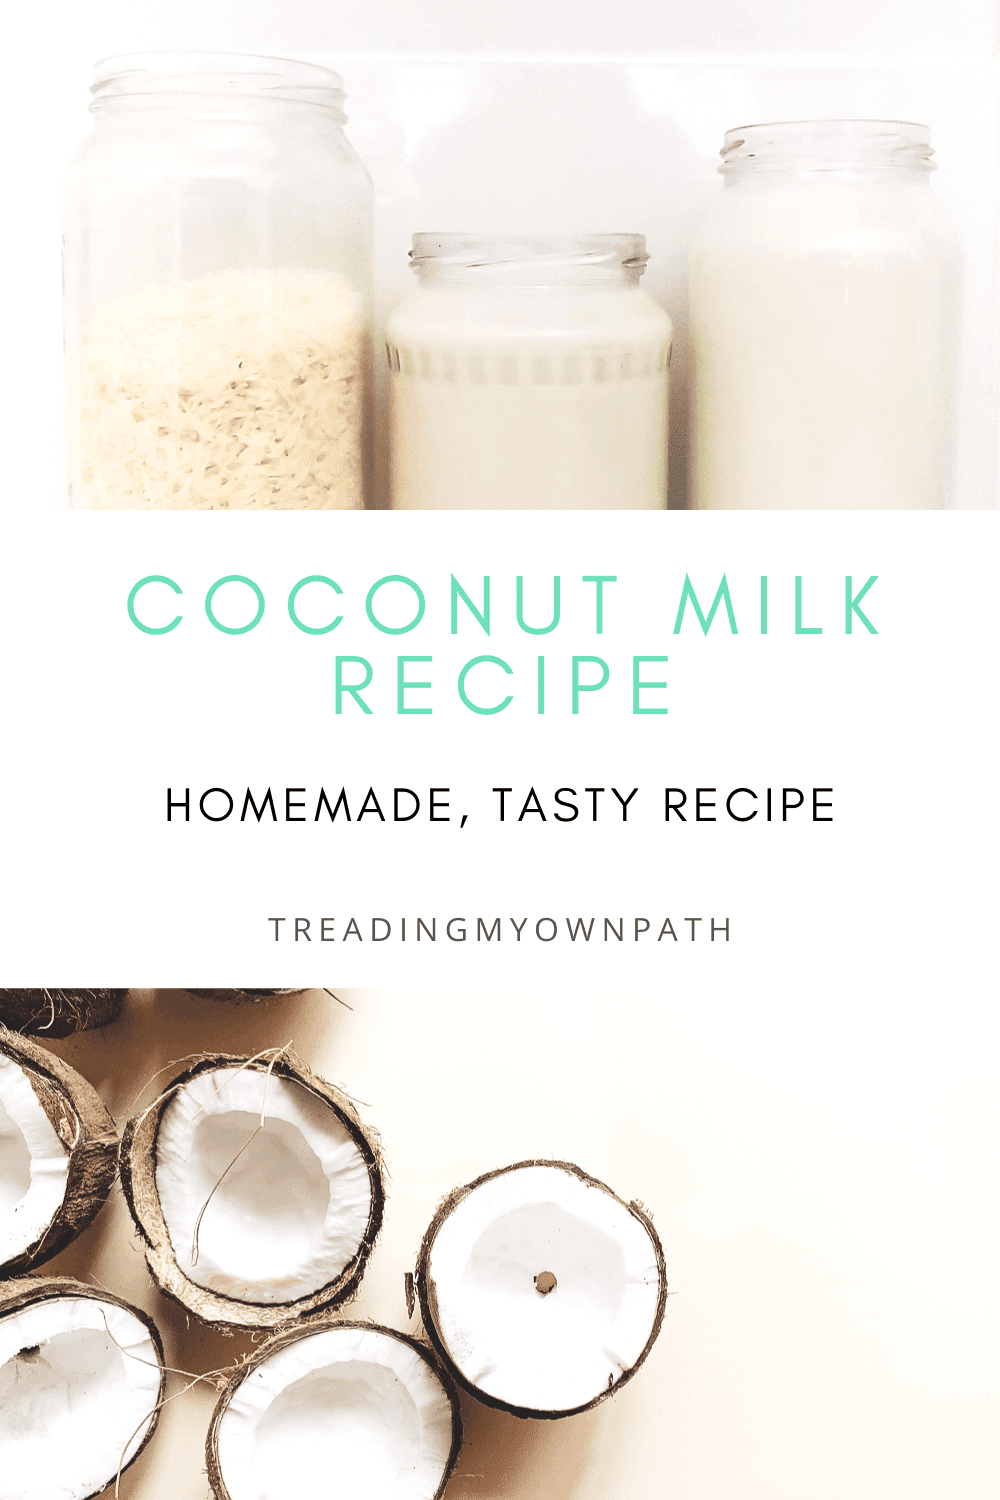 How to Make DIY Coconut Milk from Scratch (A Recipe)